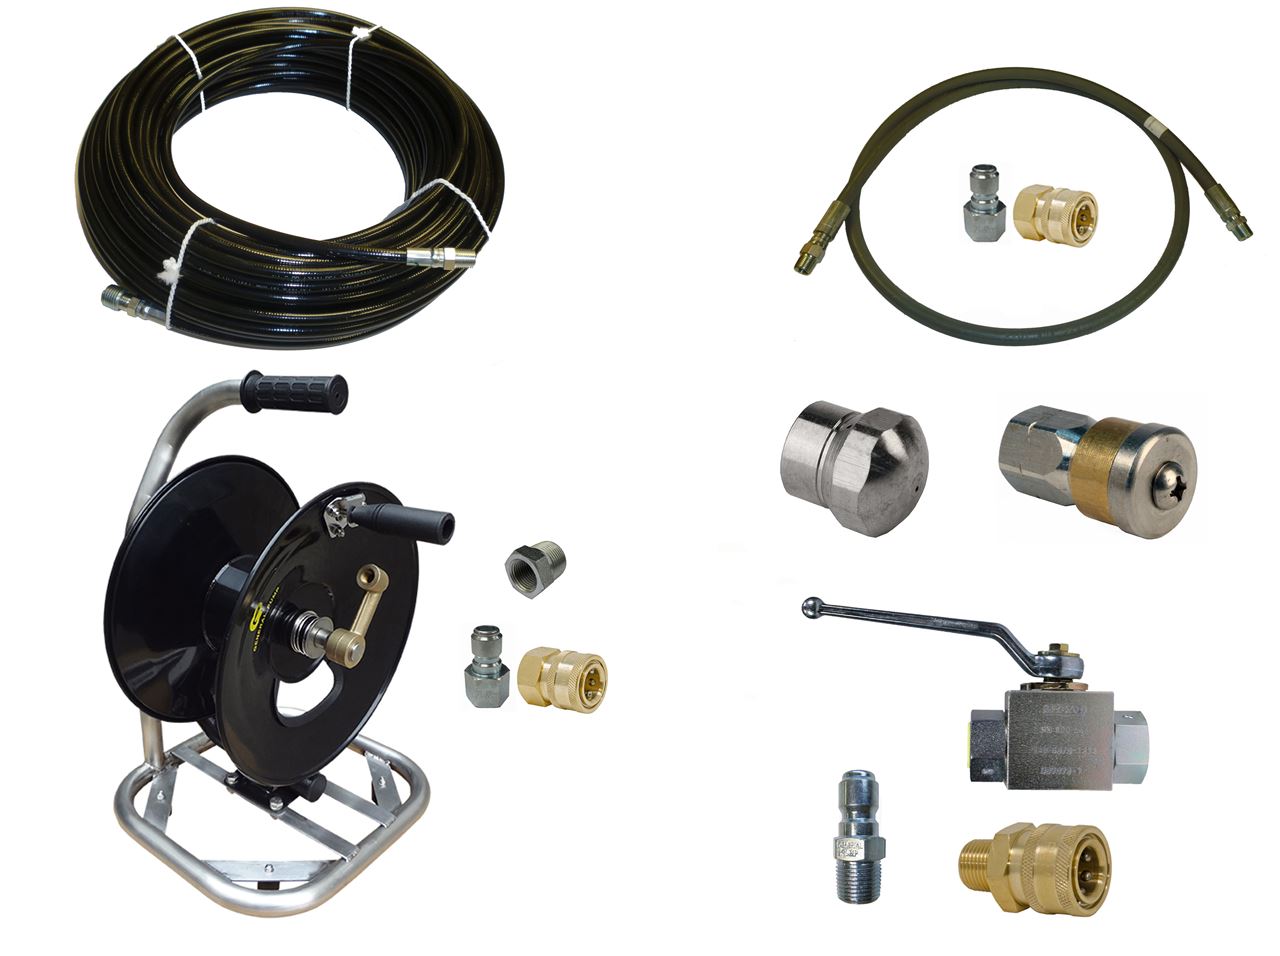 Ultimate Washer - Power Washer Hose Reel Kit for 200 FT of 3/8 In Pressure  Washer Hose, 4000 PSI